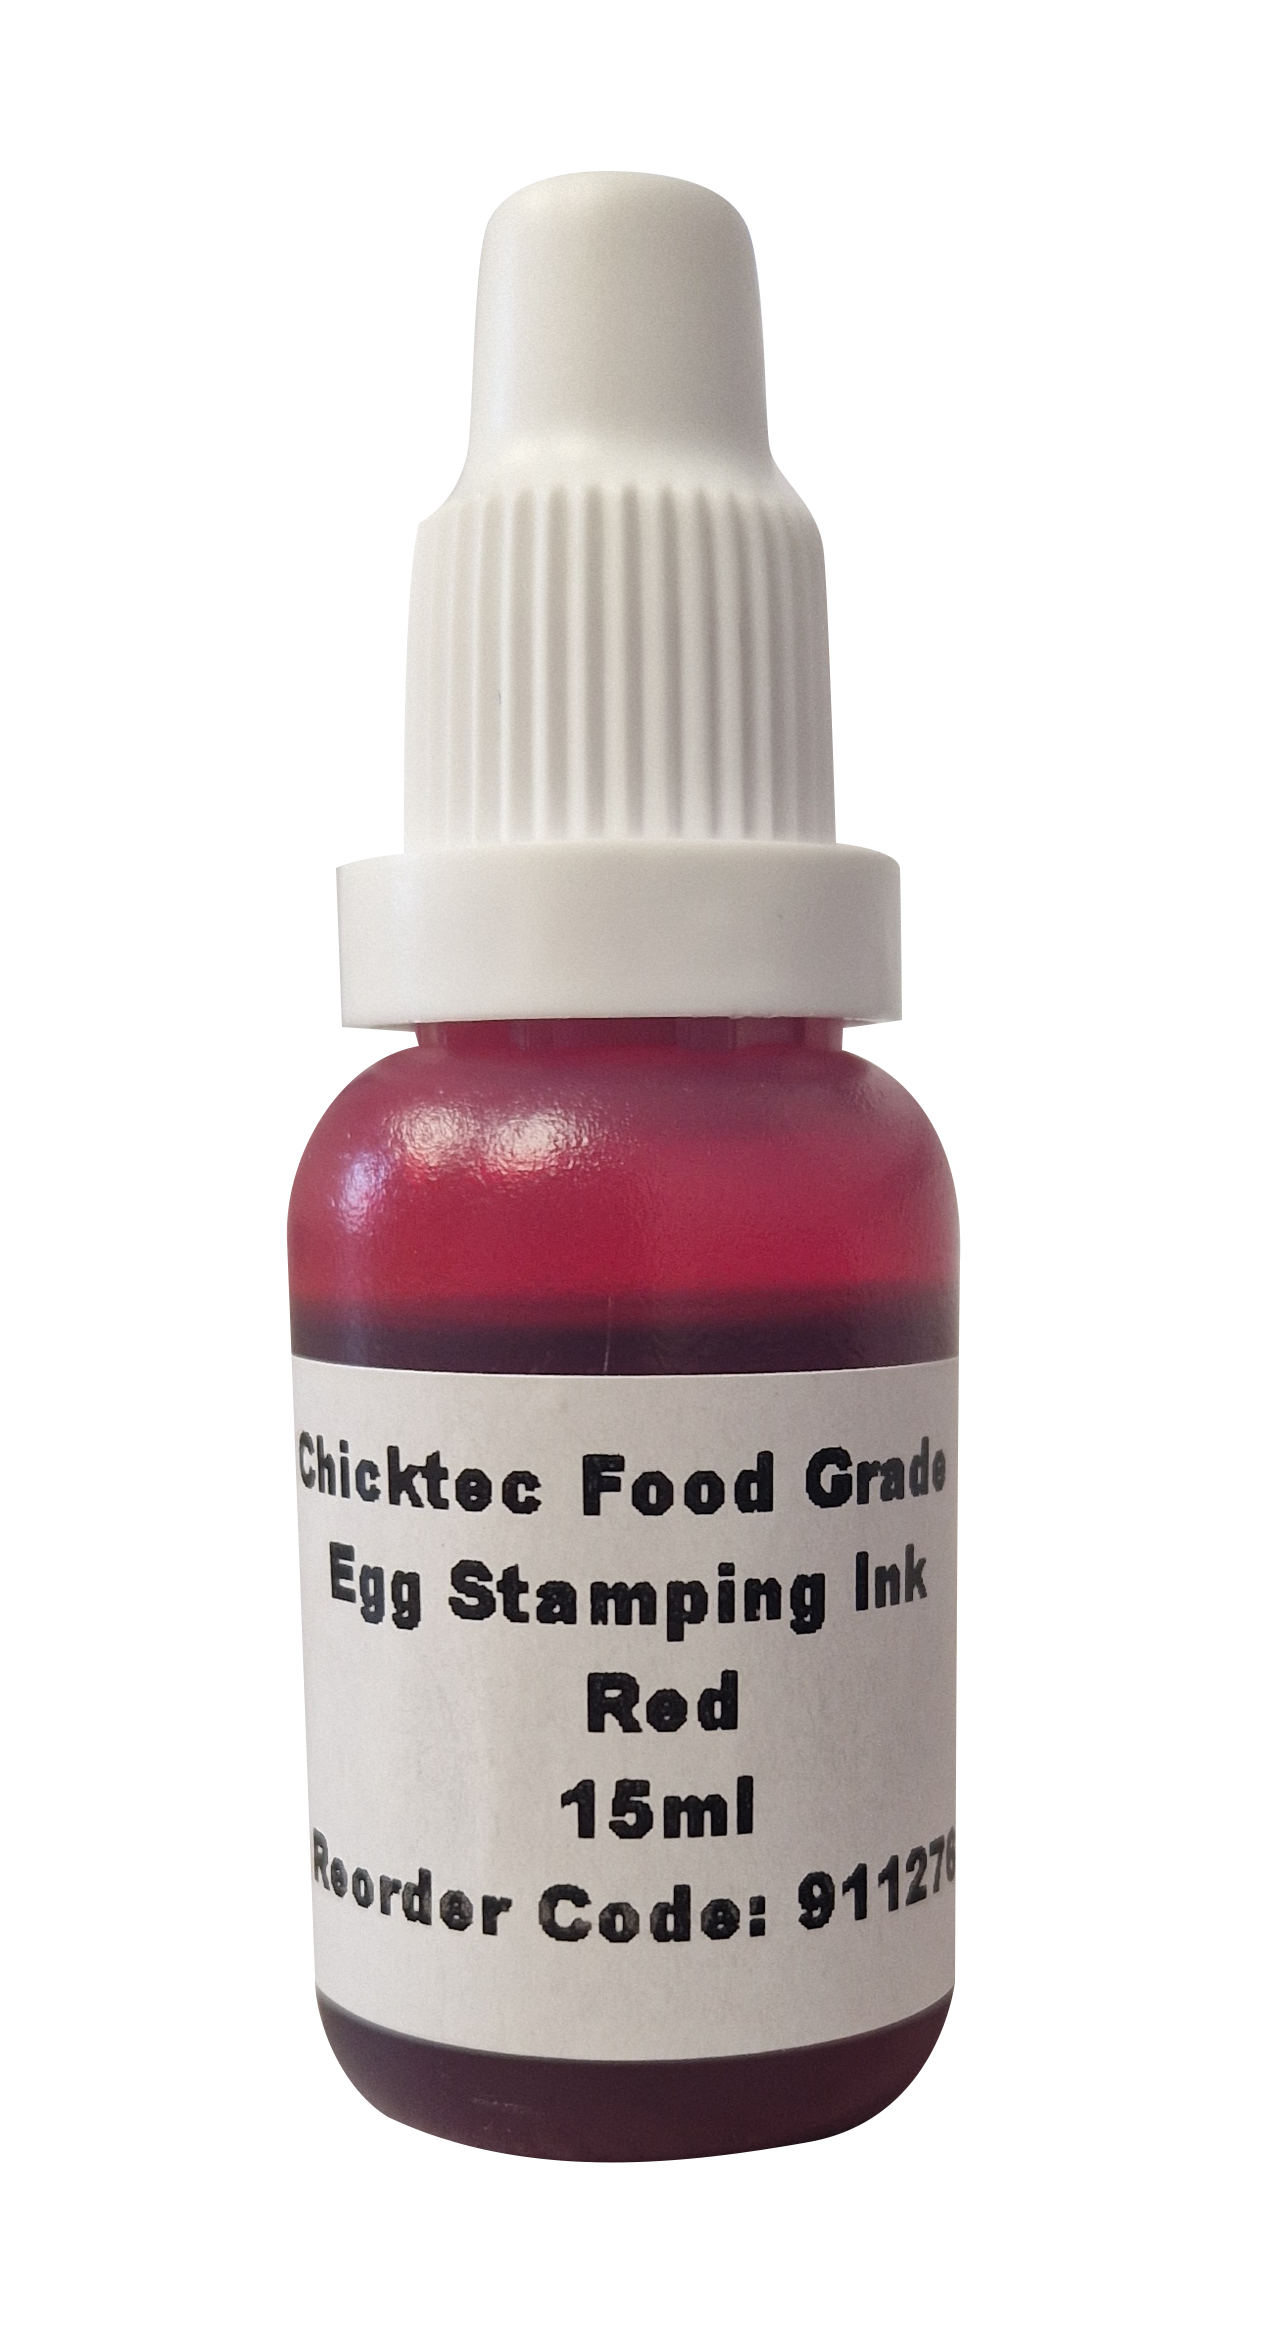 Red Re-fill Food Grade Ink for Self Inking Stamp. 15ml bottle